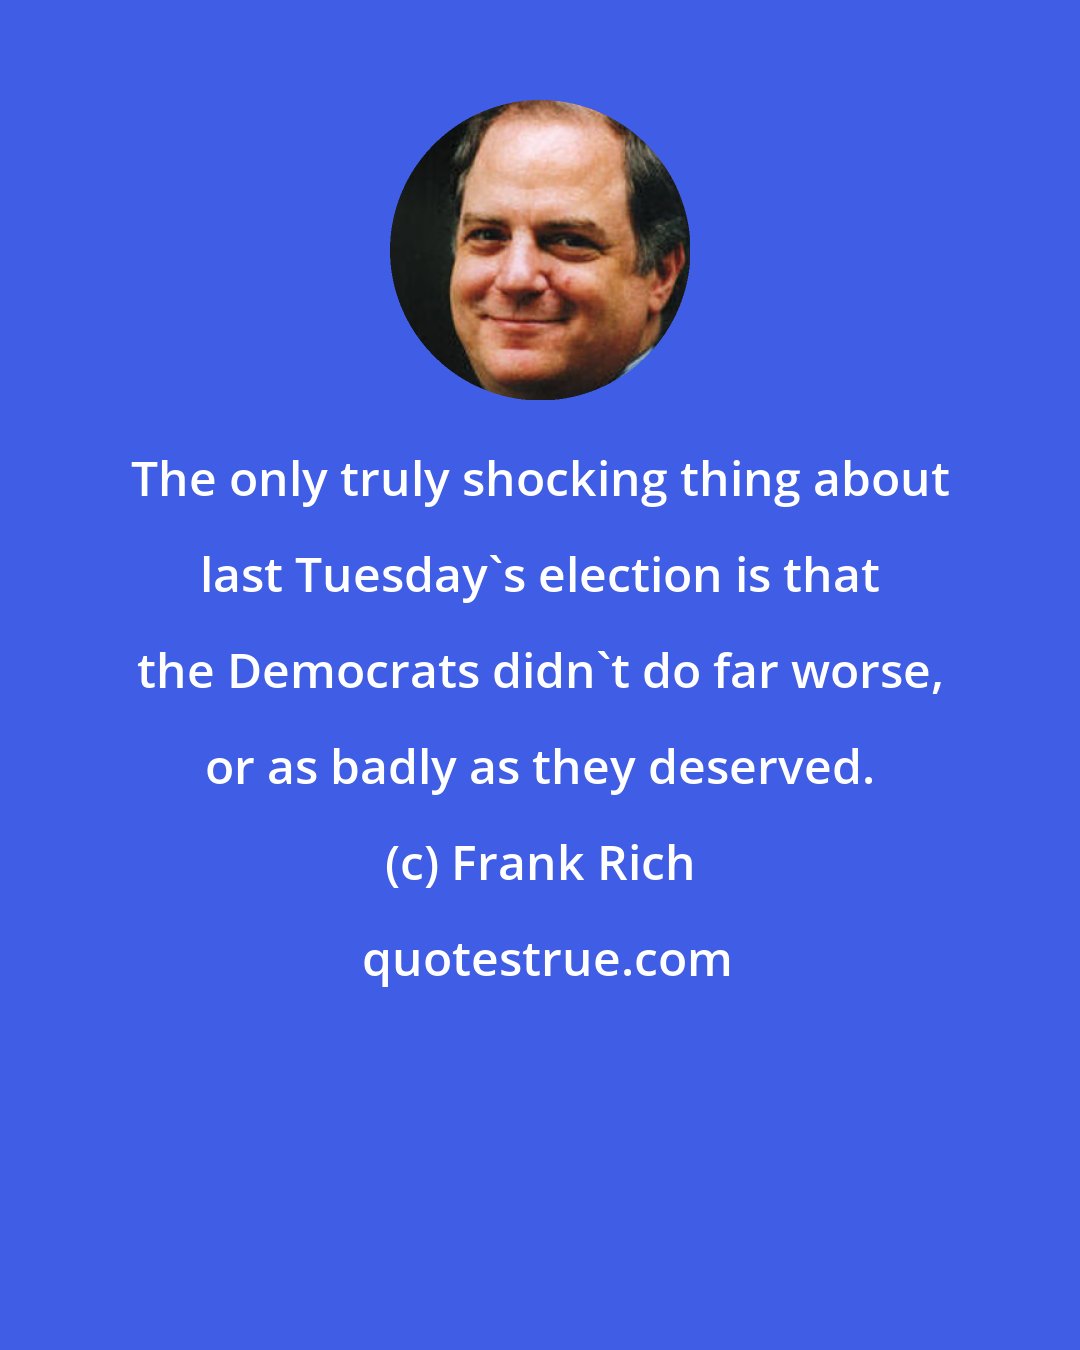 Frank Rich: The only truly shocking thing about last Tuesday's election is that the Democrats didn't do far worse, or as badly as they deserved.